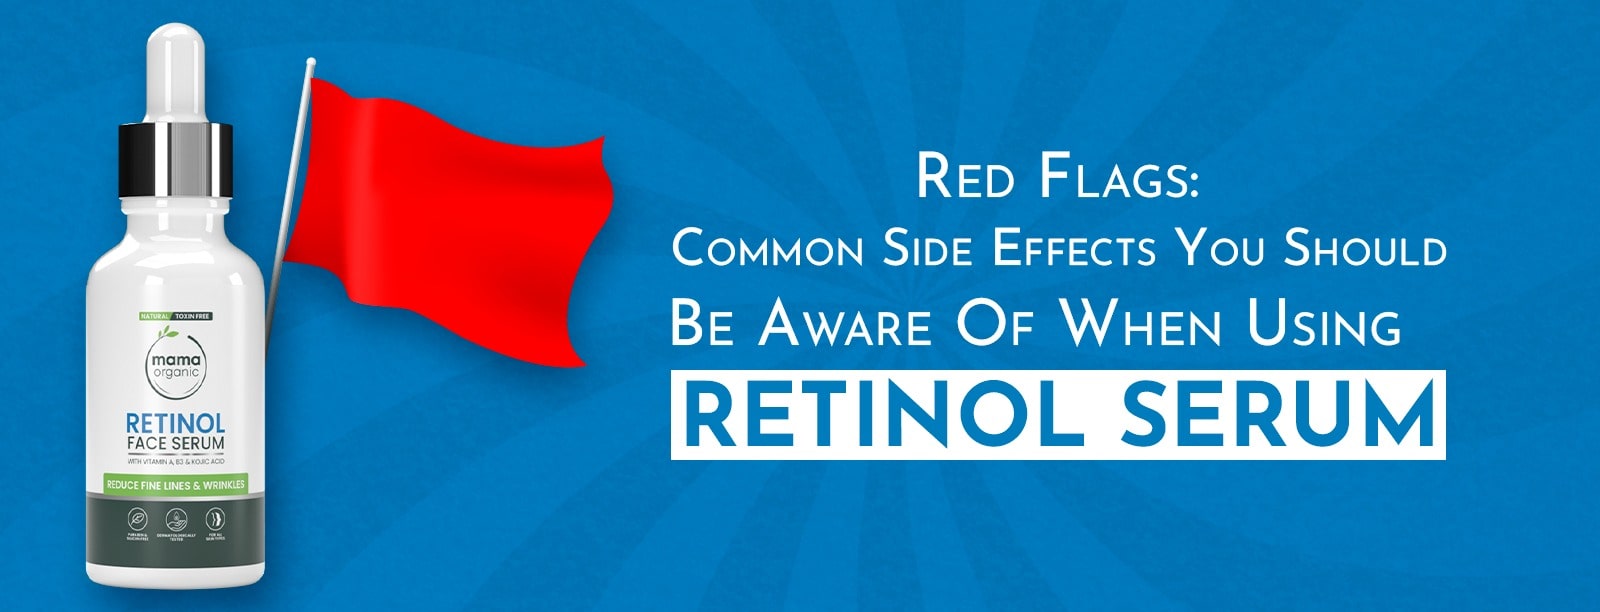 Red Flags Common Side Effects You Should Be Aware of When Using Retinol Serum